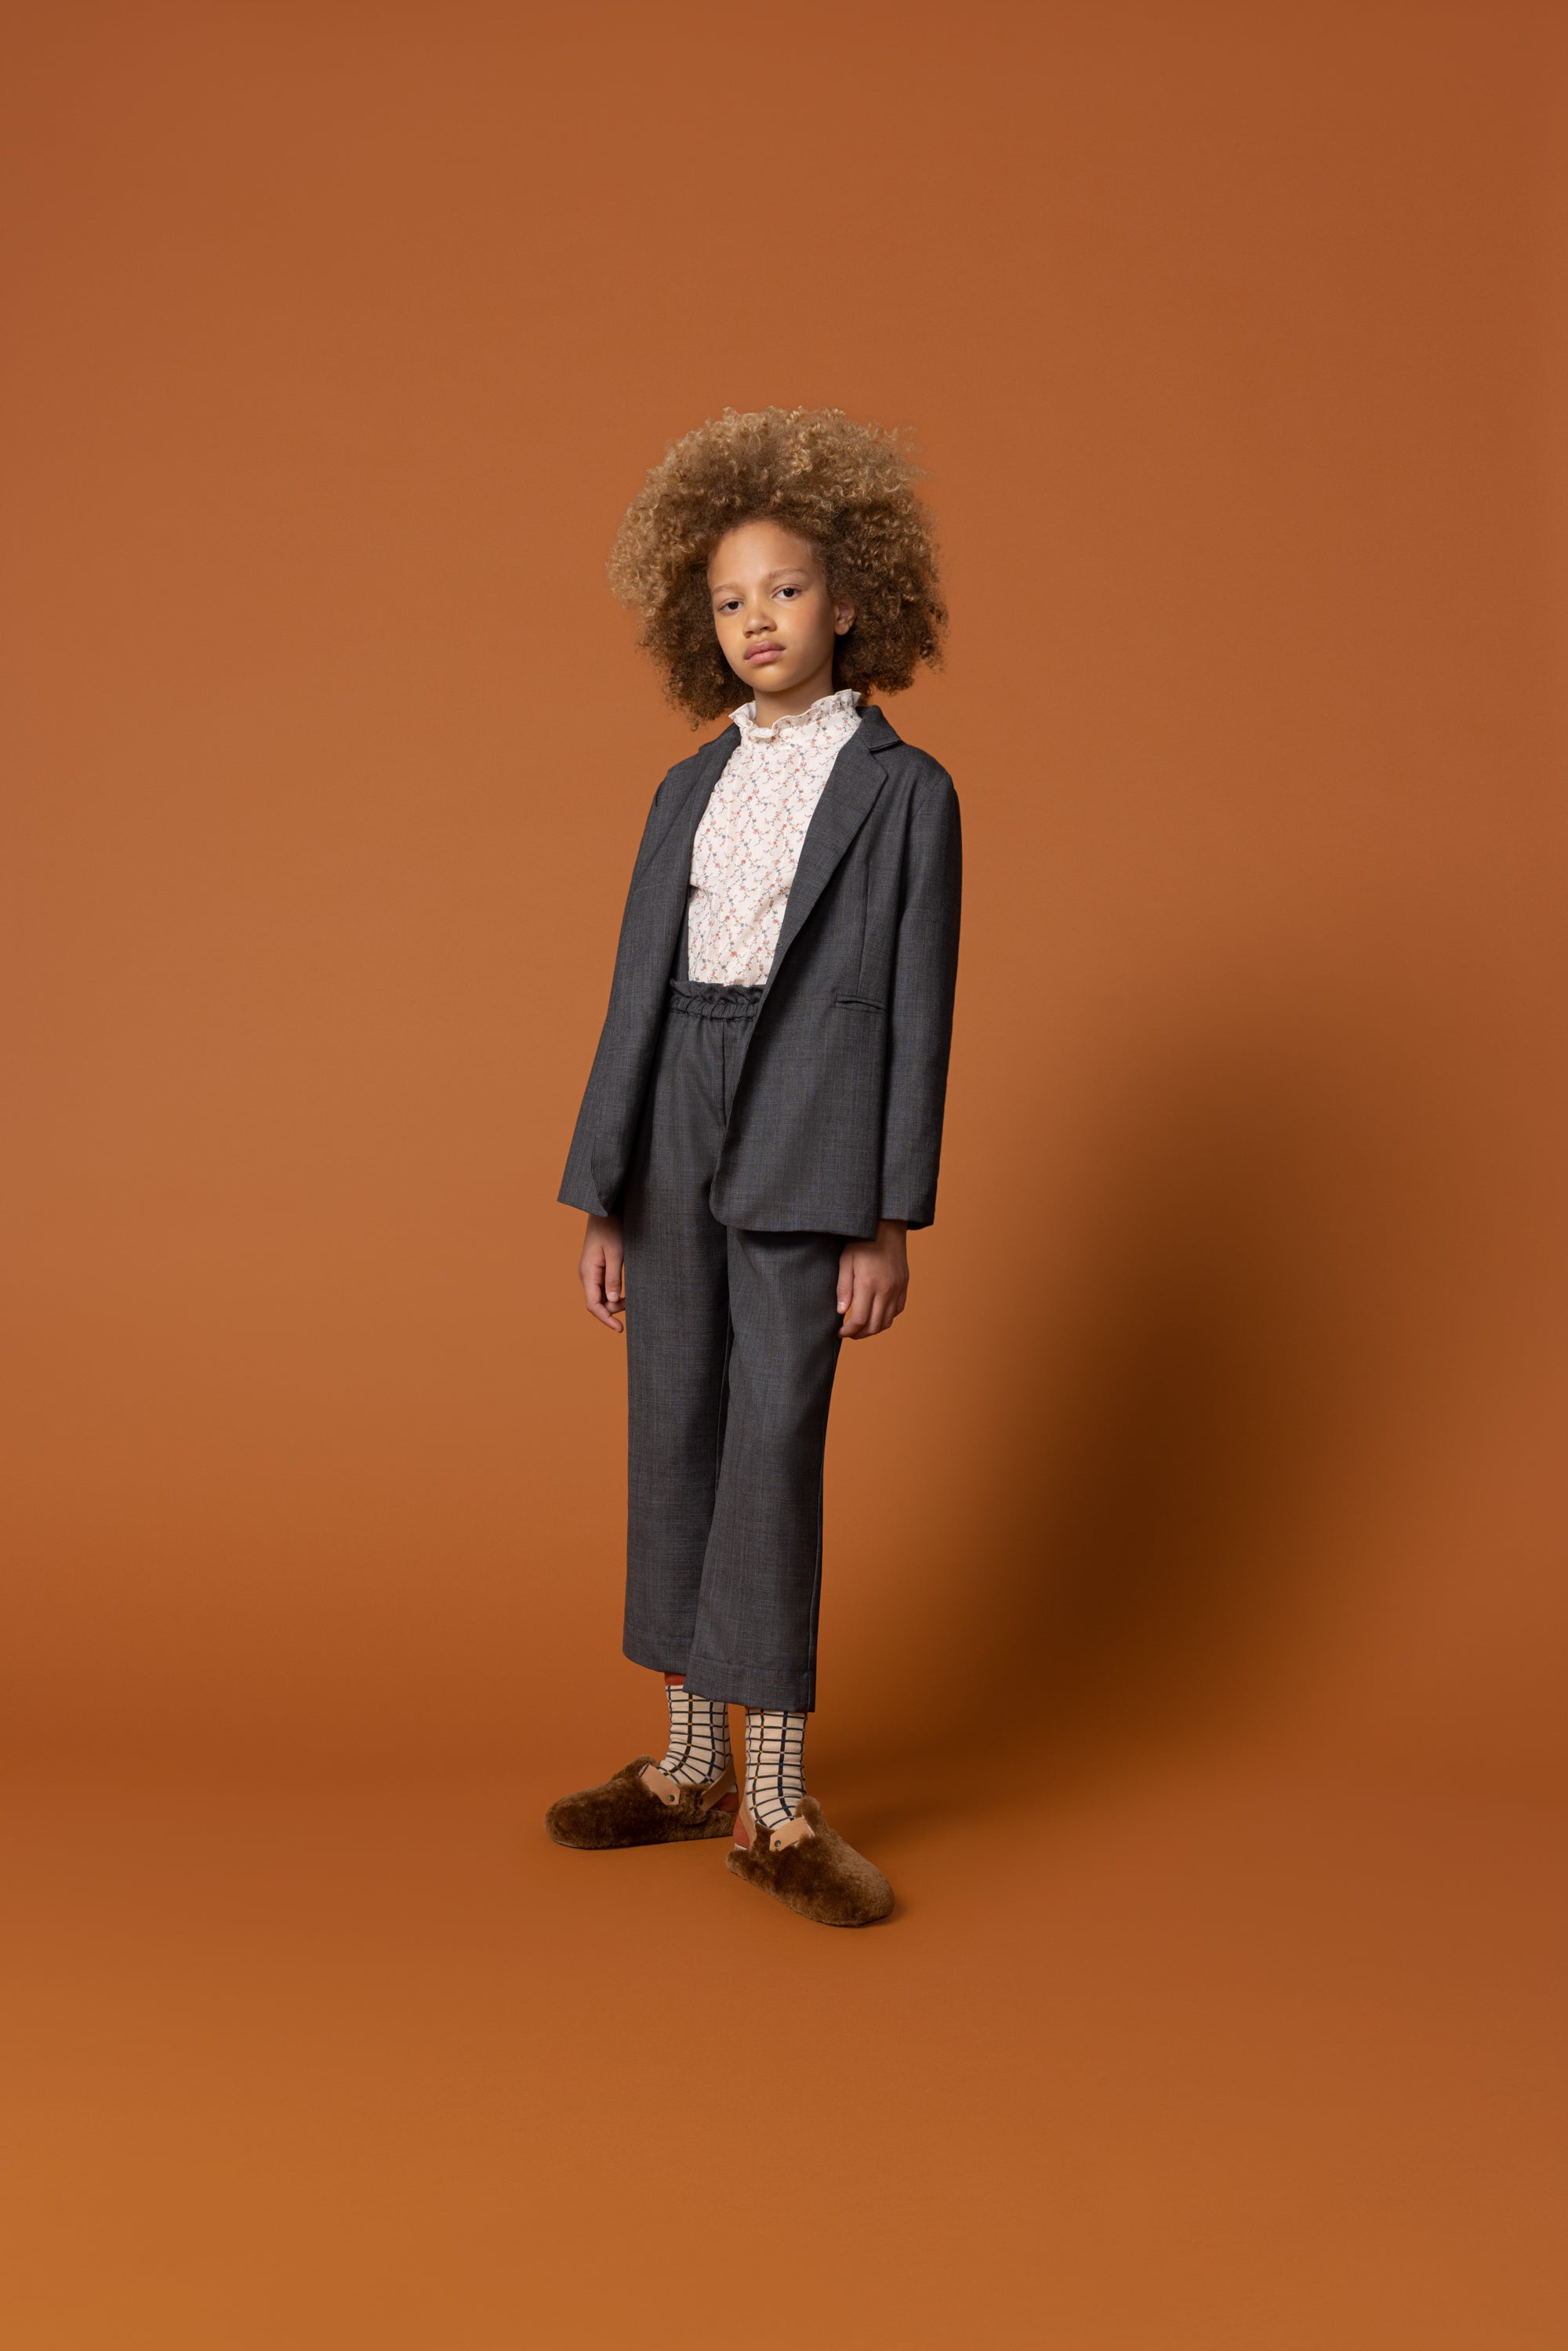 Merino Wool Suspender Pants | Kids Clothing | The Sunday Collective